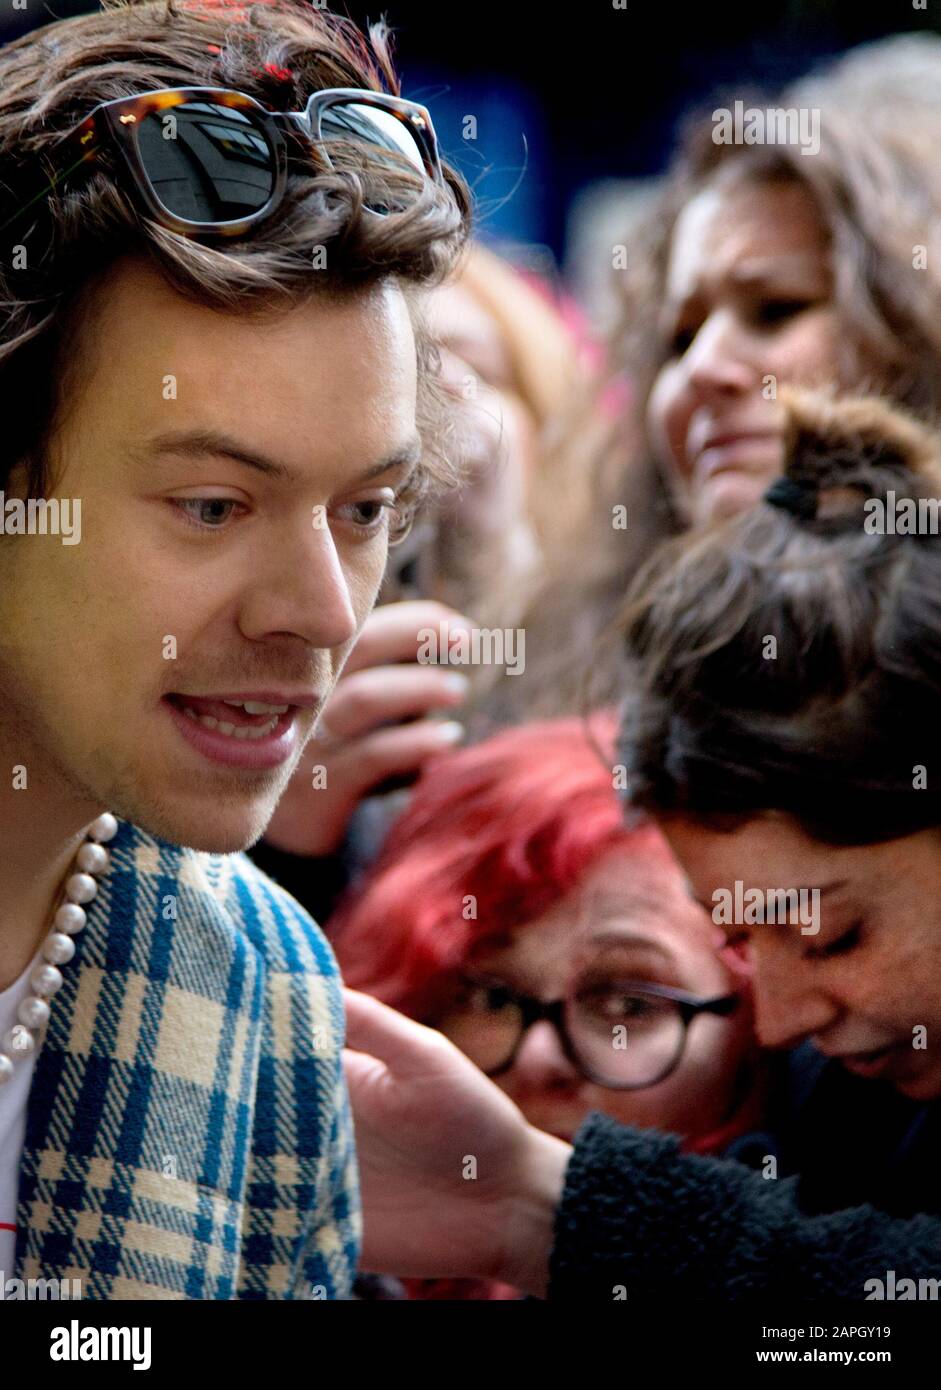 Harry Styles - One Direction Singer - meeting a large crowd of fans outside BBC Broadcasting House after doing an interview for Radio 1 to promote hi Stock Photo